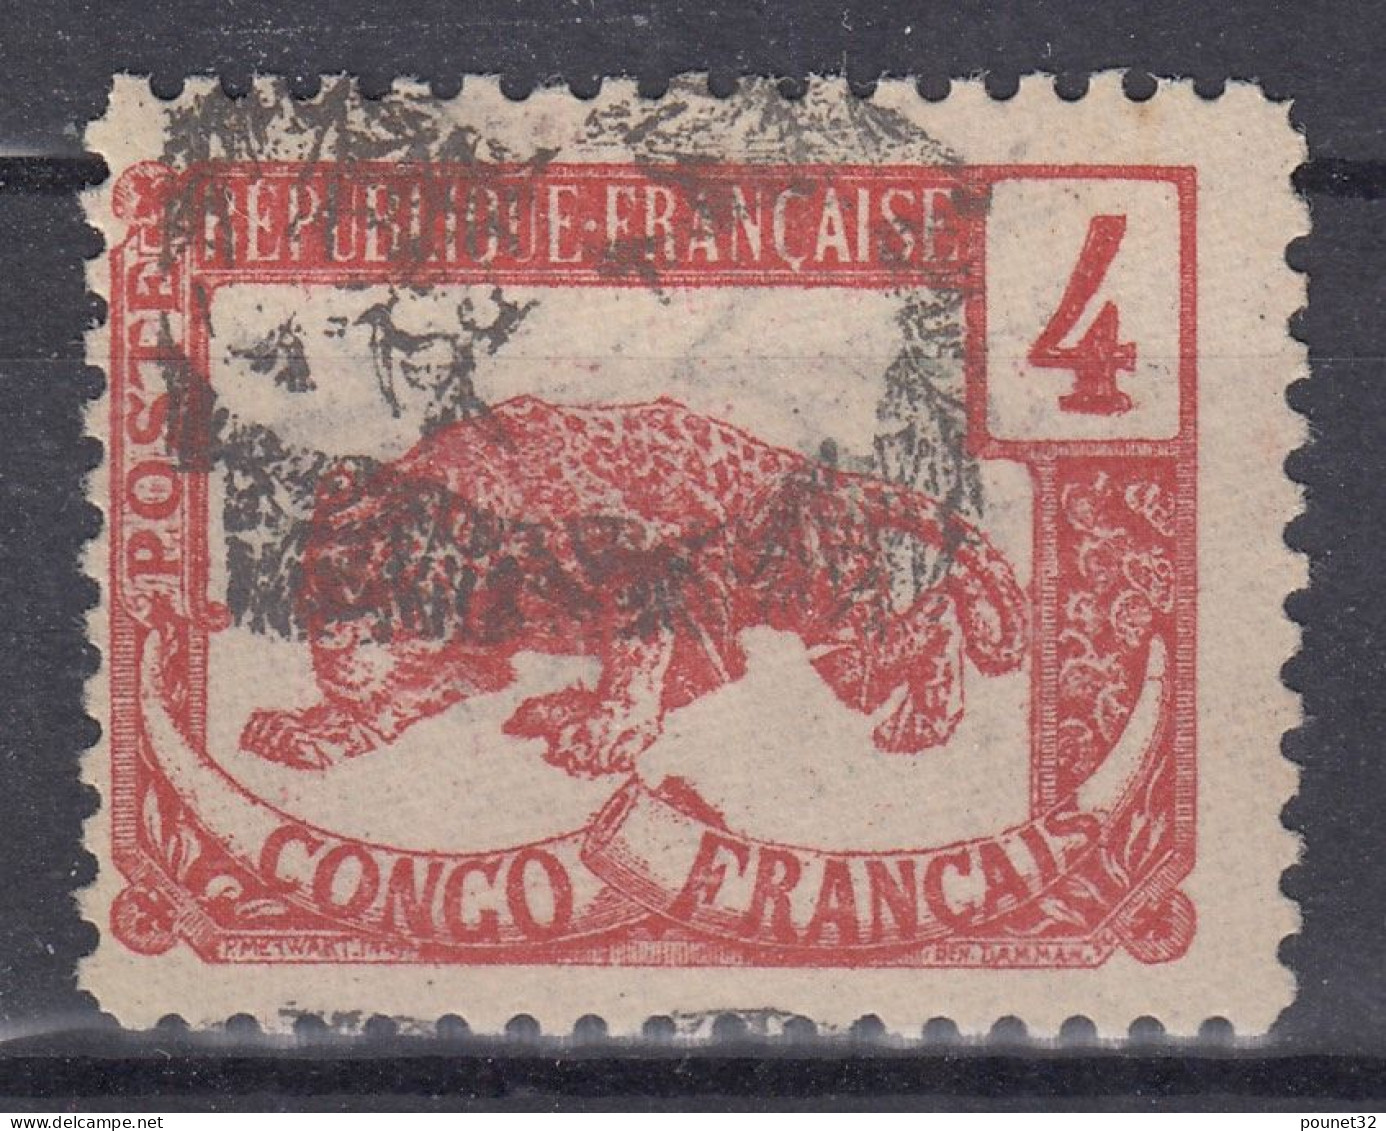 CONGO N° 29b VARIETE FOND RENVERSE & DEPLACE NEUF * GOMME TRACE DE CHARNIERE - Unused Stamps